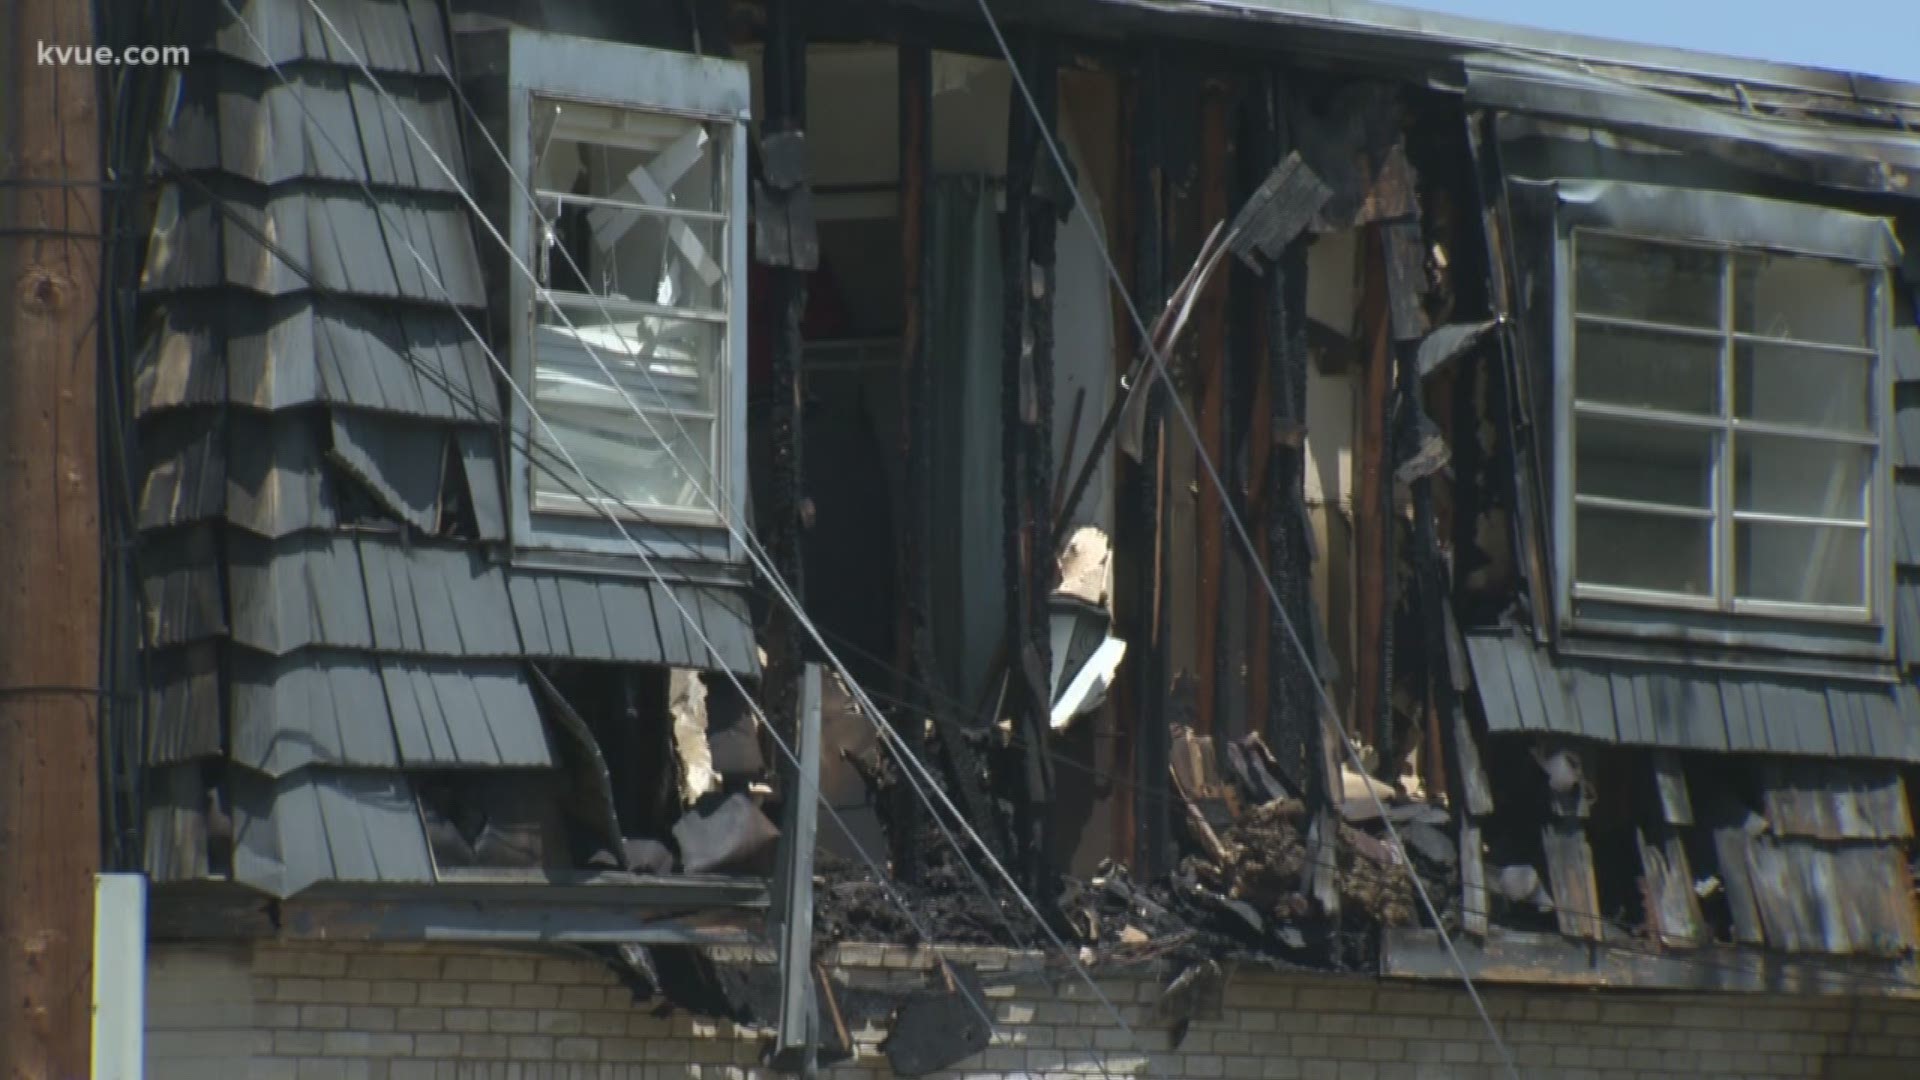 Five people are considered missing after a fire that happened Friday in San Marcos.